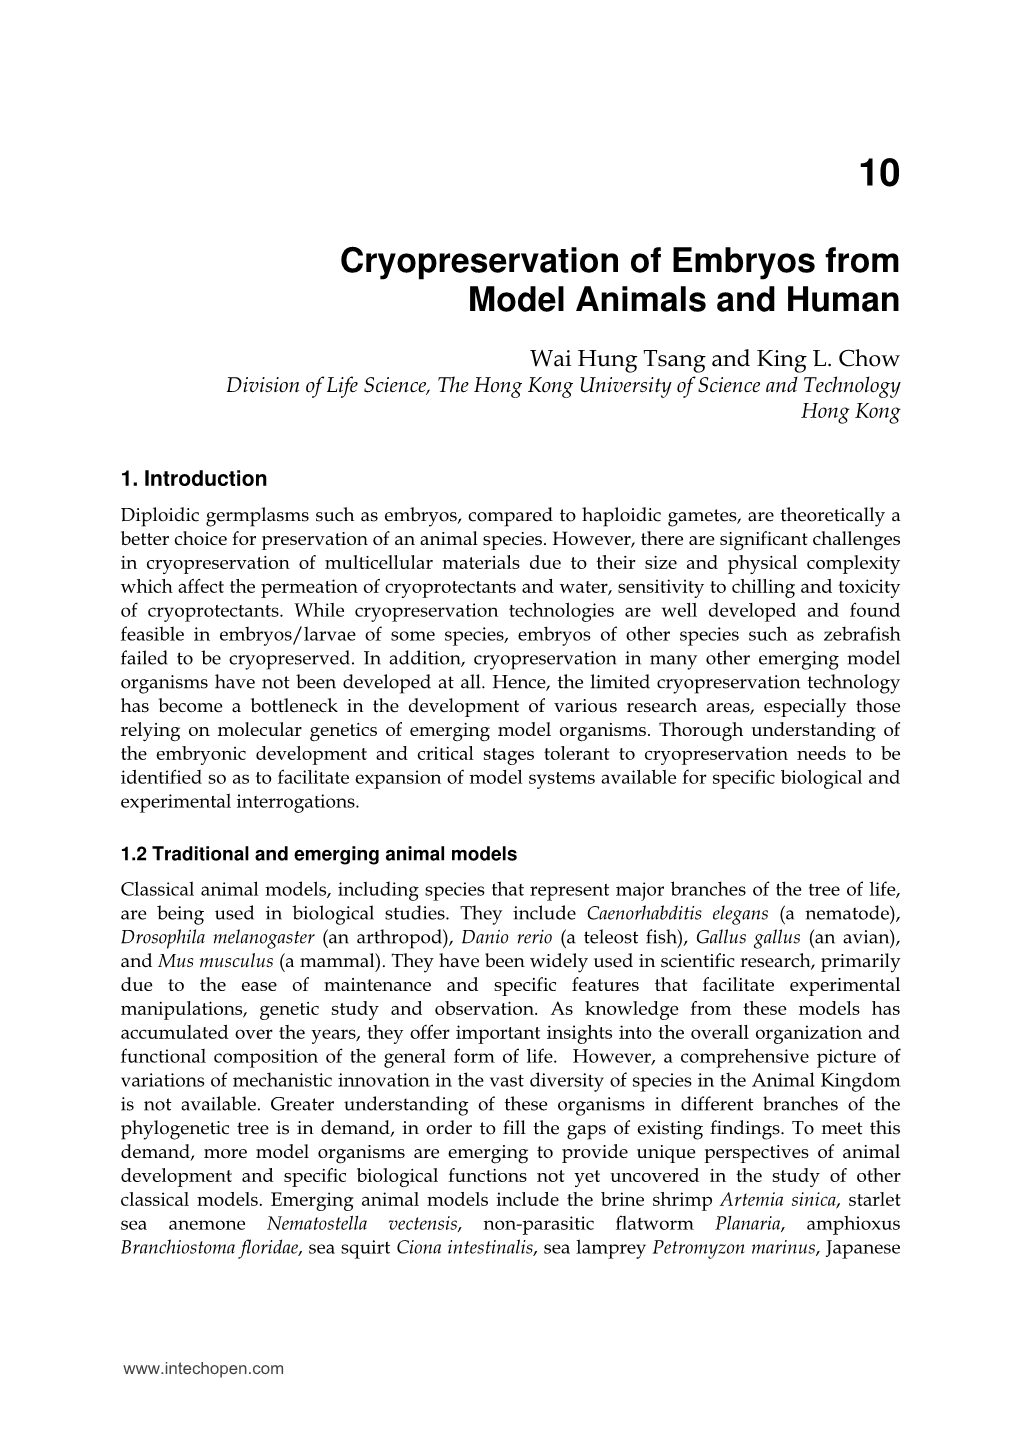 Cryopreservation of Embryos from Model Animals and Human